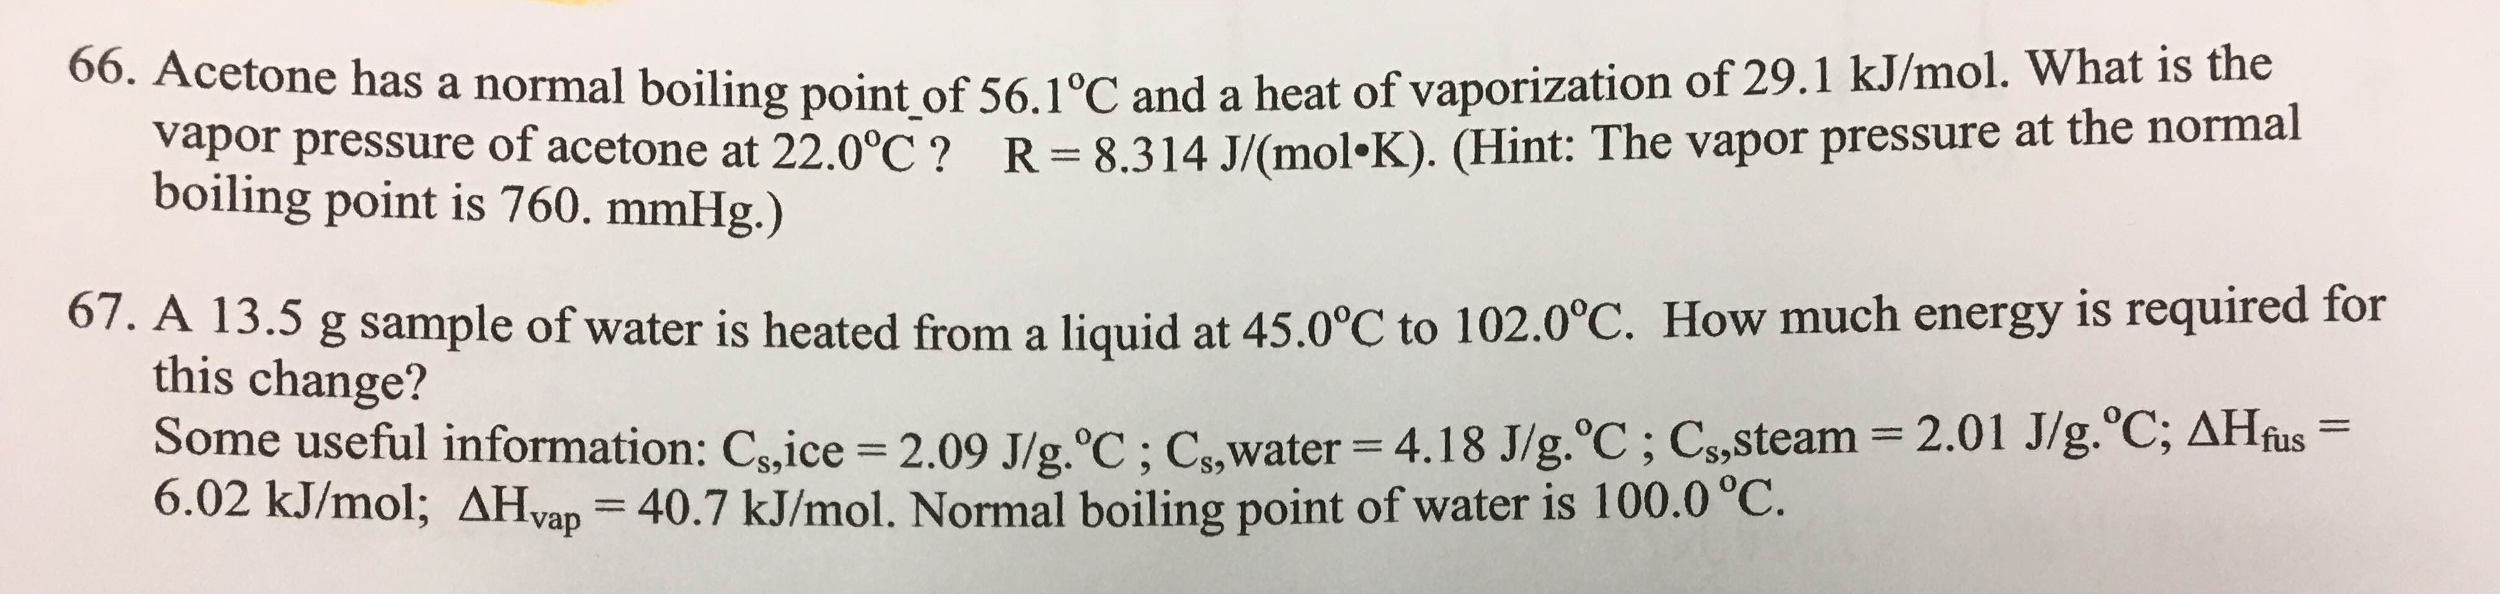 why does acetone have a low boiling point